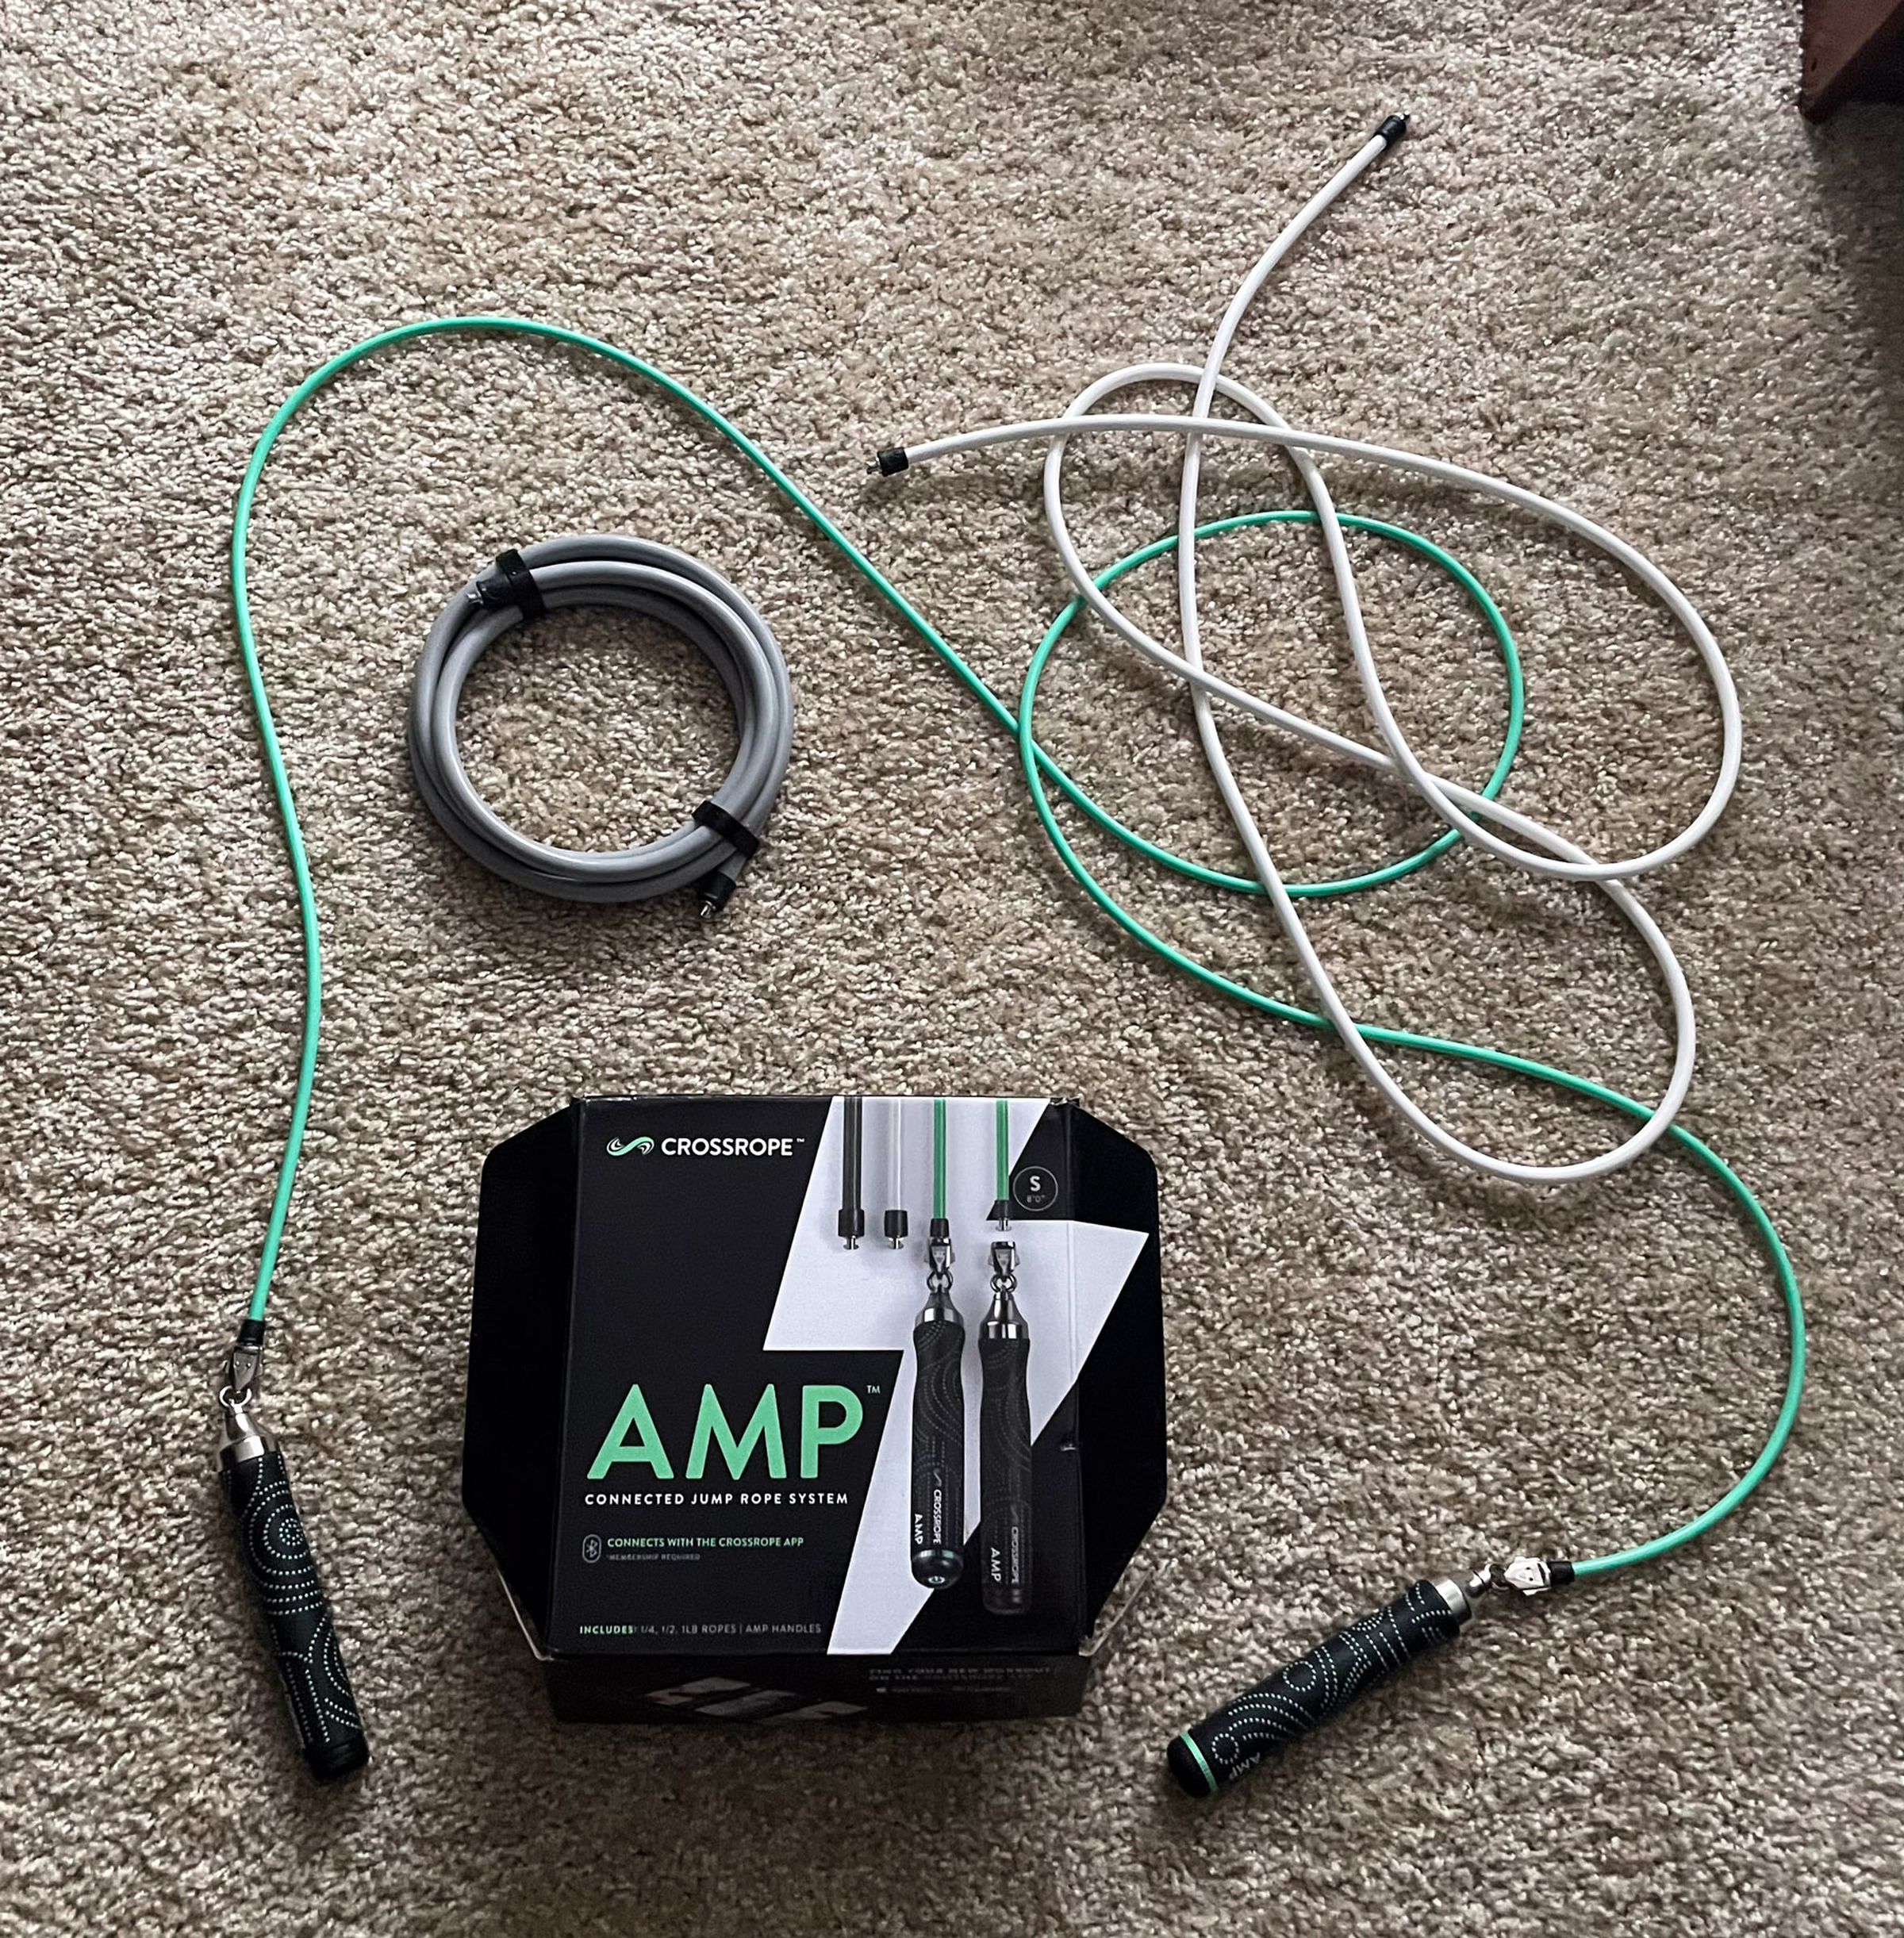 The Crossrope AMP Jump Rope set box surrounded by its three green, gray, and white weighted jump ropes, with the AMP handled attached to the green one.